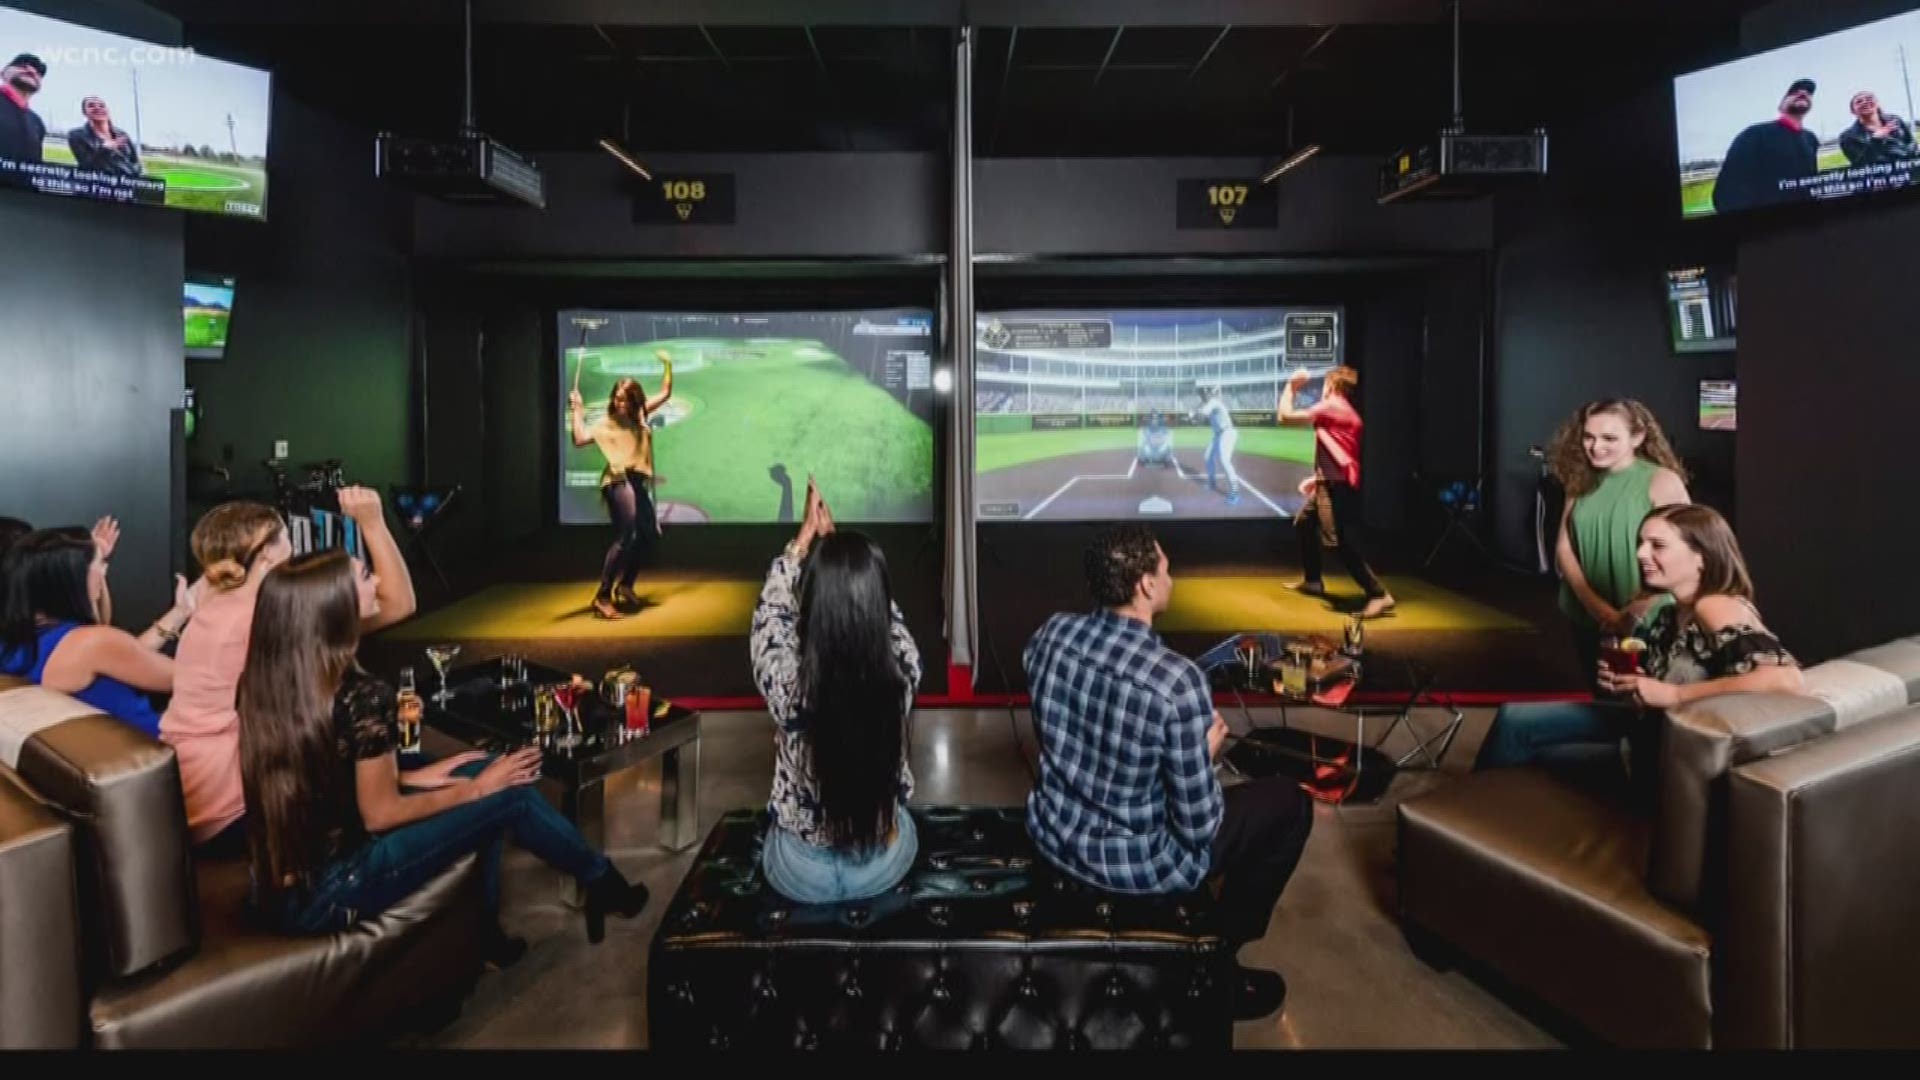 Unlike the other Charlotte locations, the spot in uptown won't have a full driving range, but state-of-the-art simulators for friends to enjoy.